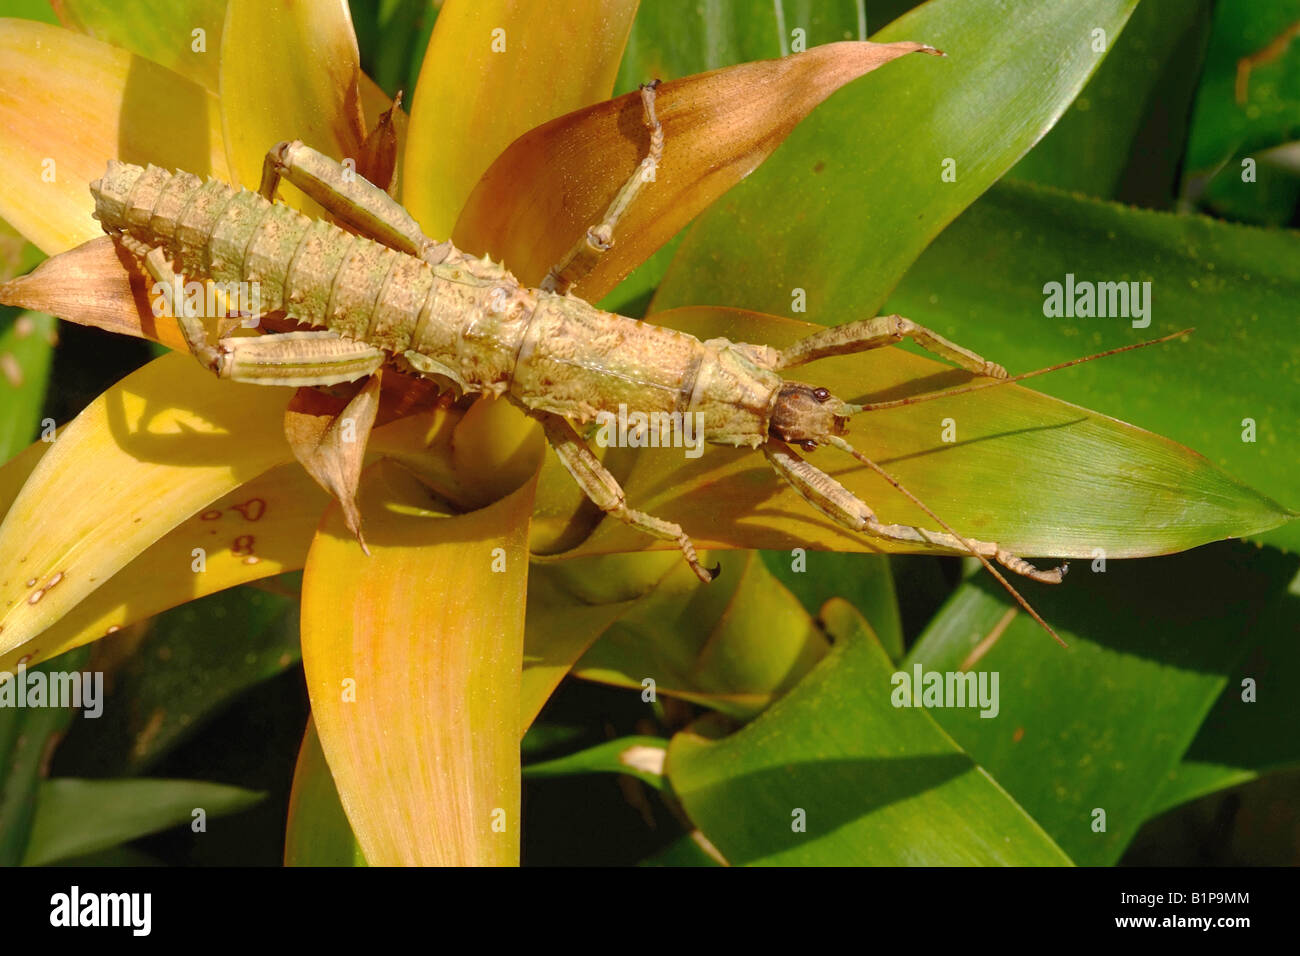 5056104   STICK INSECT  Giant Spiny  GIANT SPINY STICK-INSECT on Bromeliads GUZMANIA sp. CAMOUFLAGE and MIMICRY COLOUR. Stock Photo